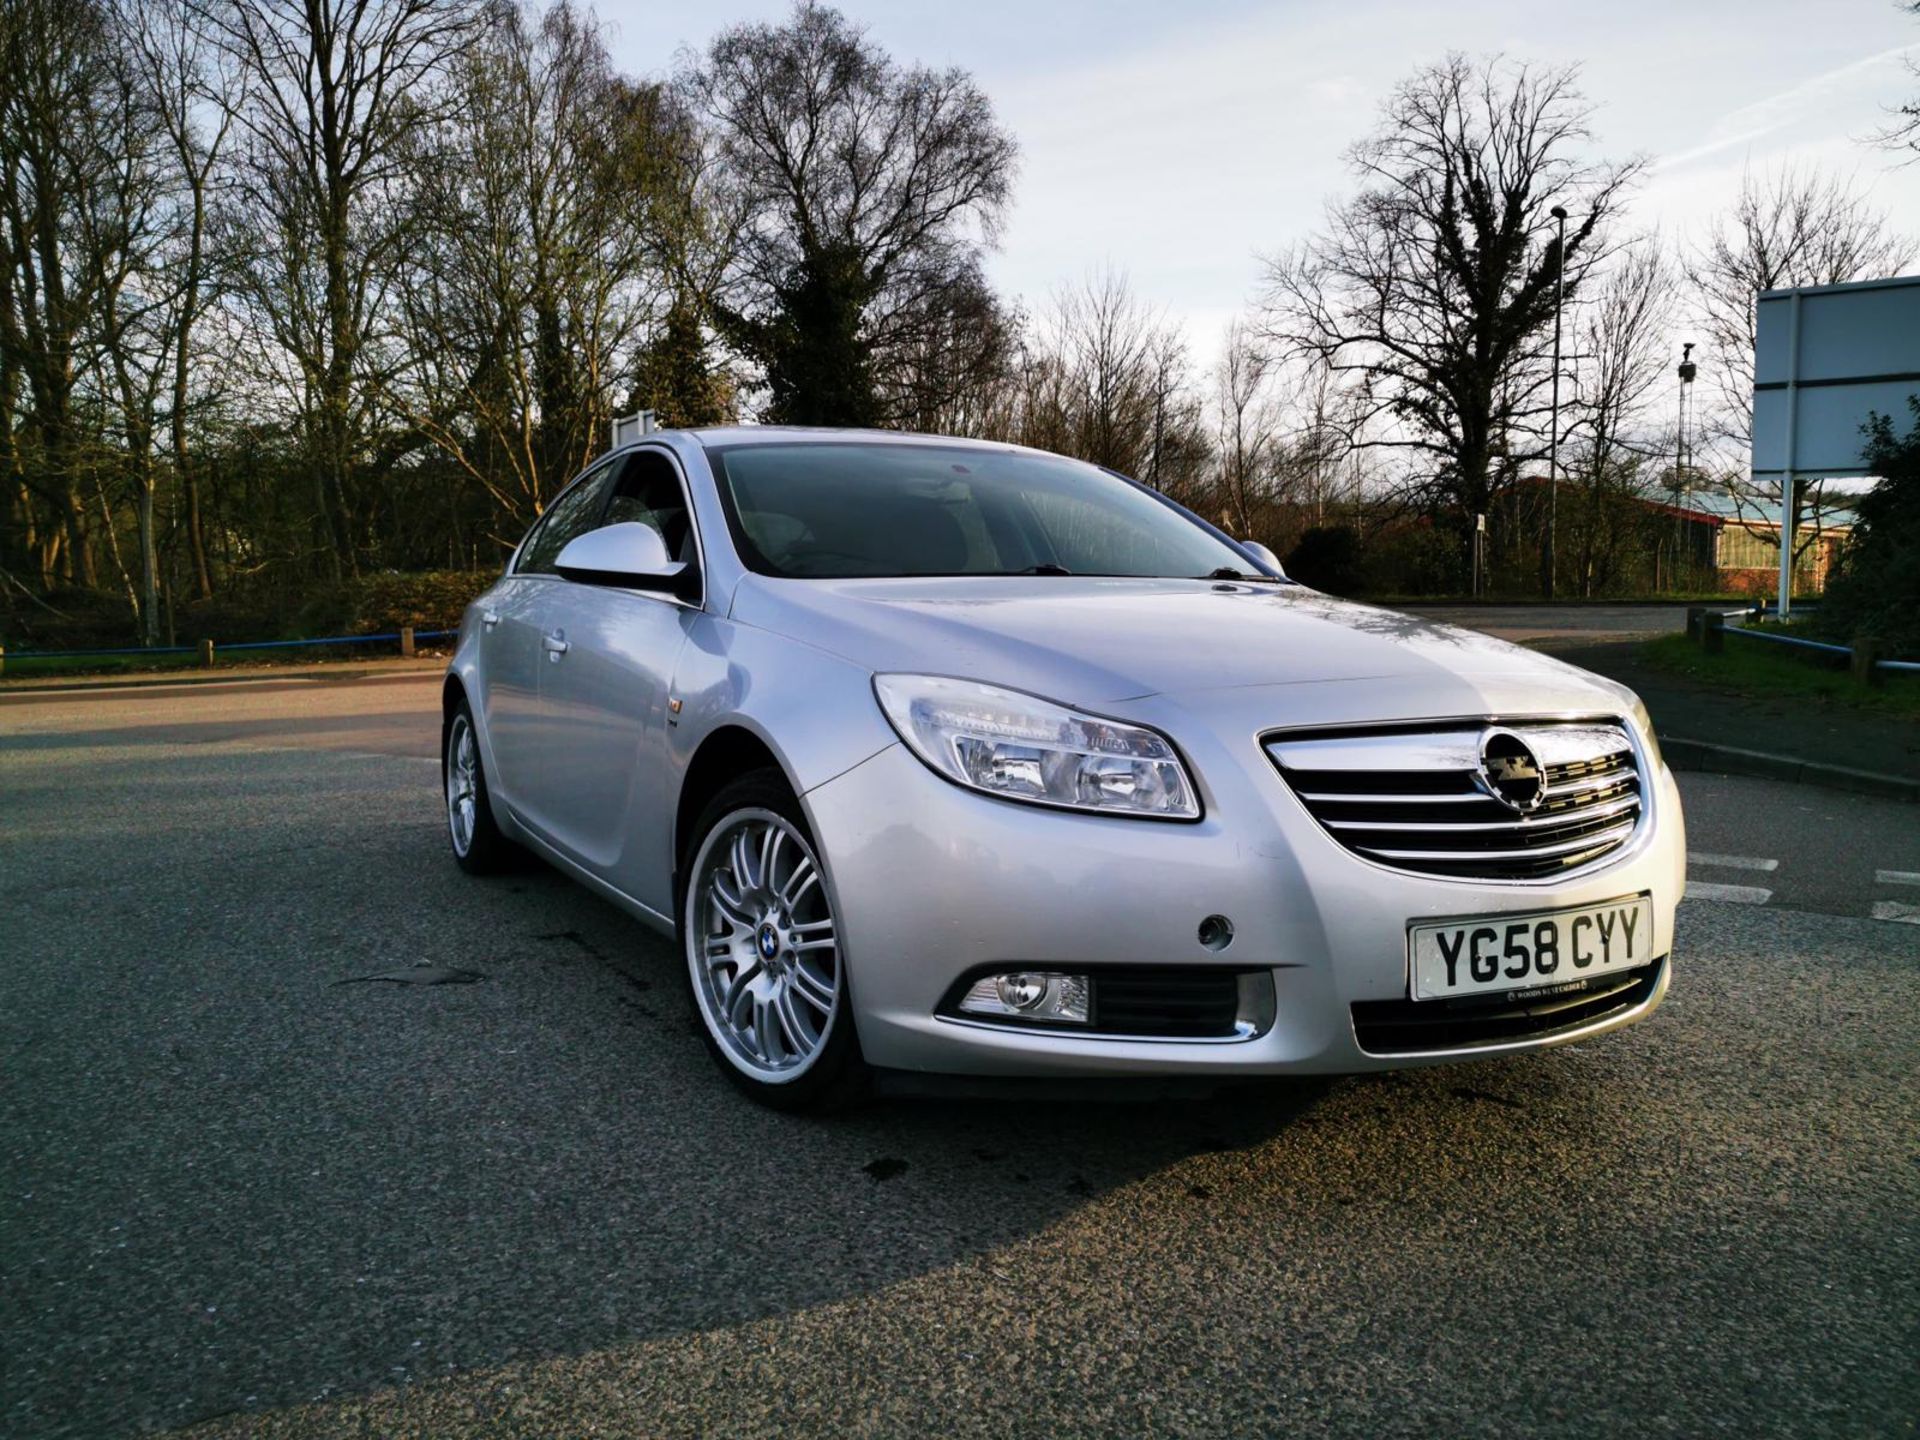 2009/58 REG VAUXHALL INSIGNIA SRI 160 CDTI 2.0 DIESEL 5DR HATCHBACK, SHOWING 3 FORMER KEEPERS - Image 2 of 22